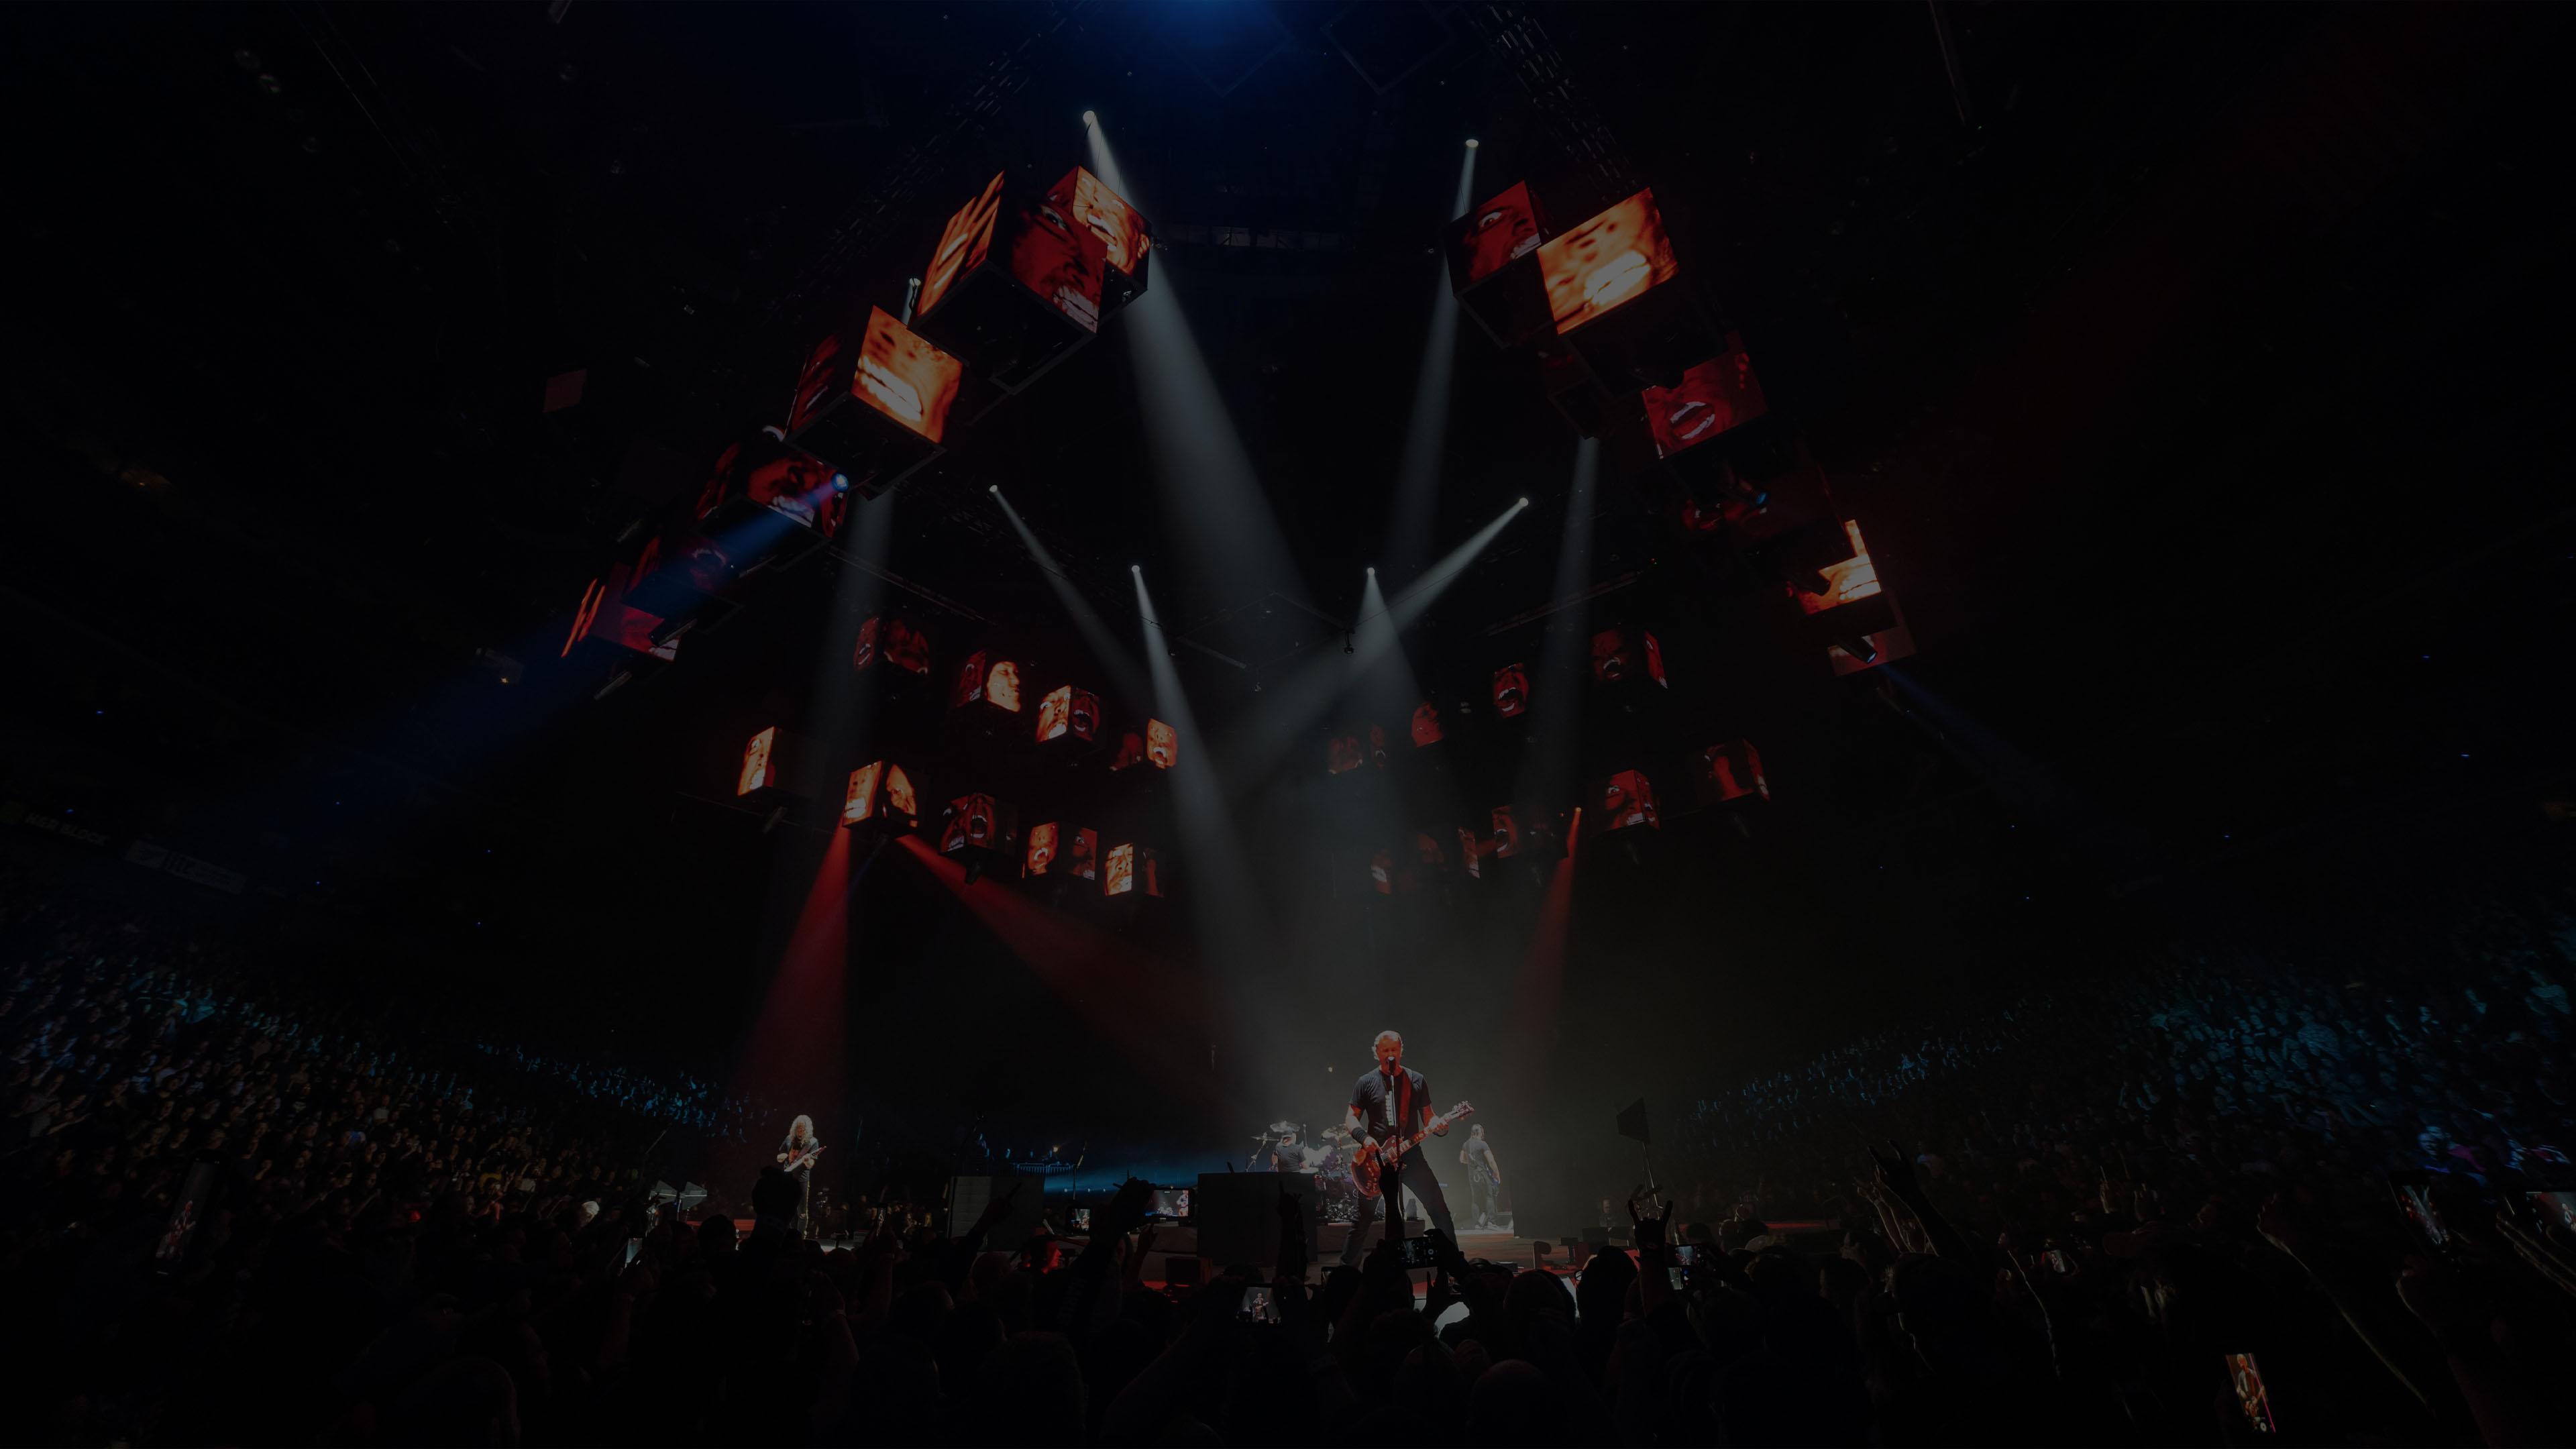 Metallica at Sprint Center in Kansas City, MO on March 6, 2019